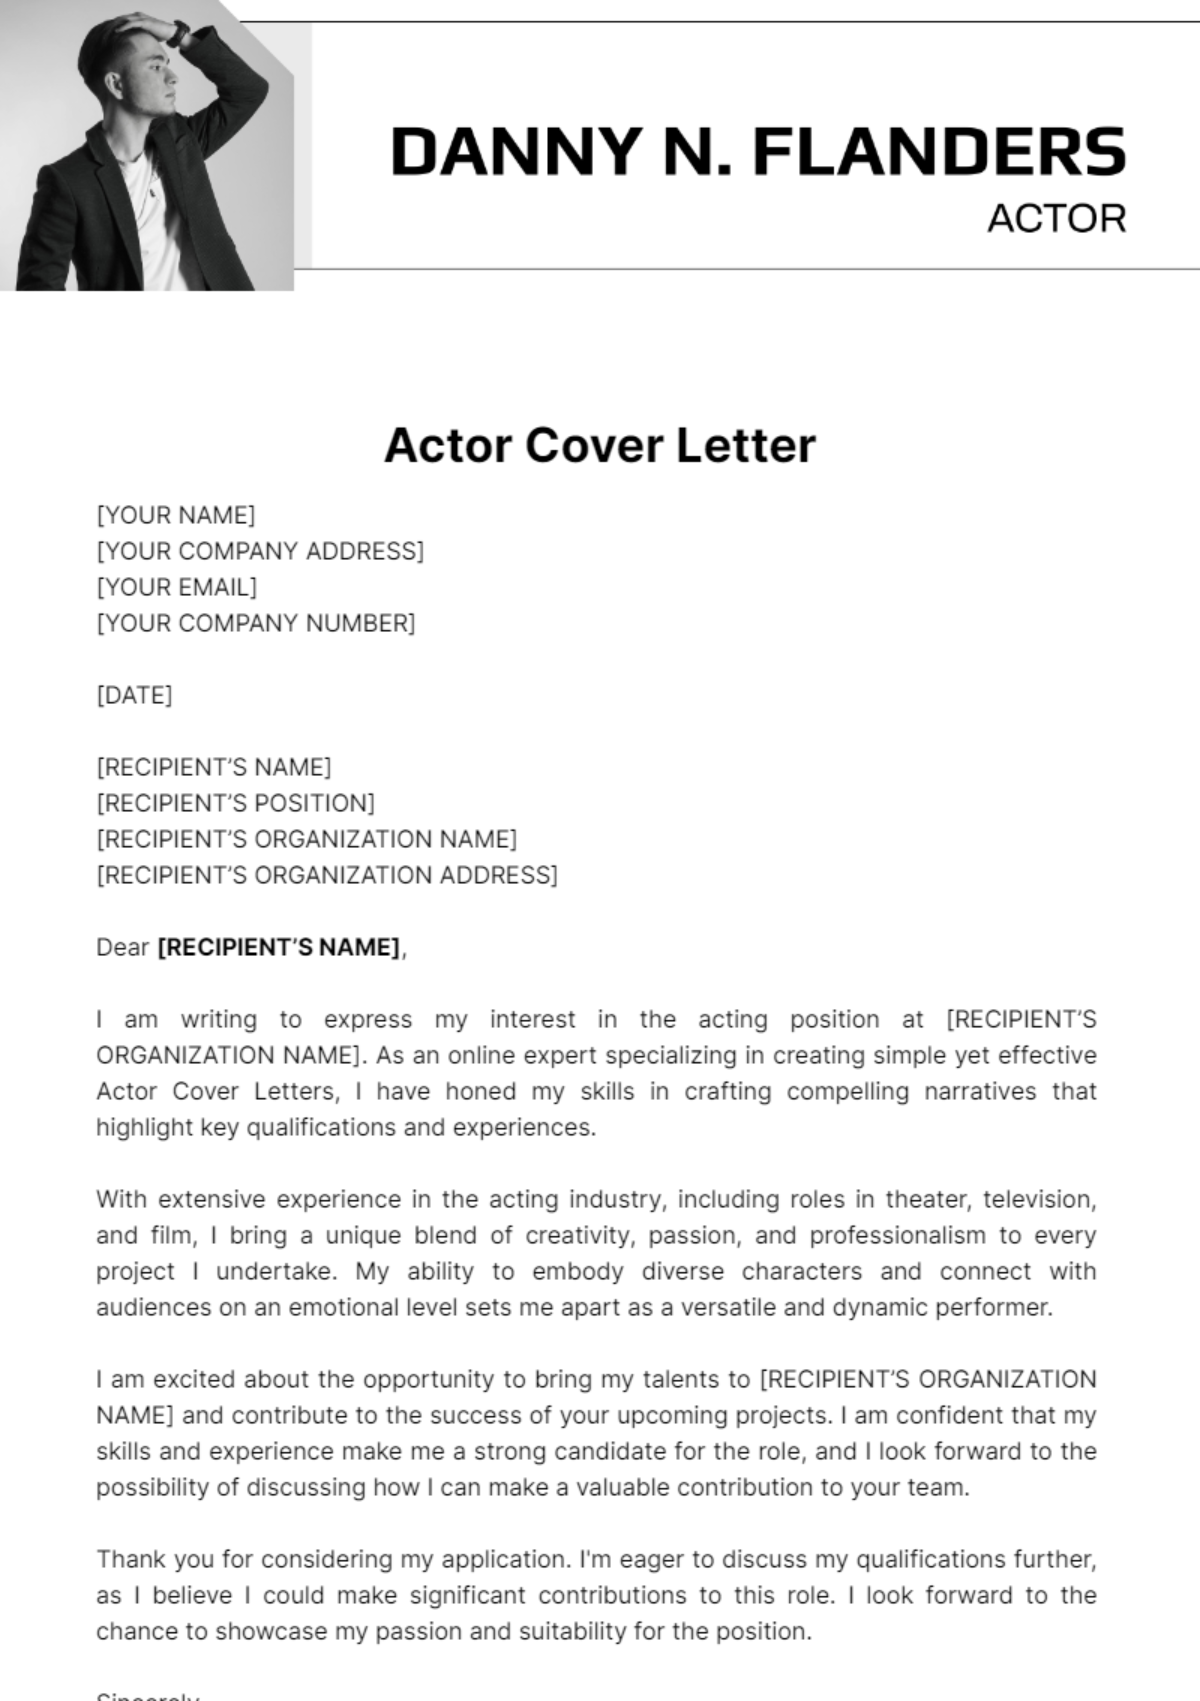 Actor Cover Letter Template